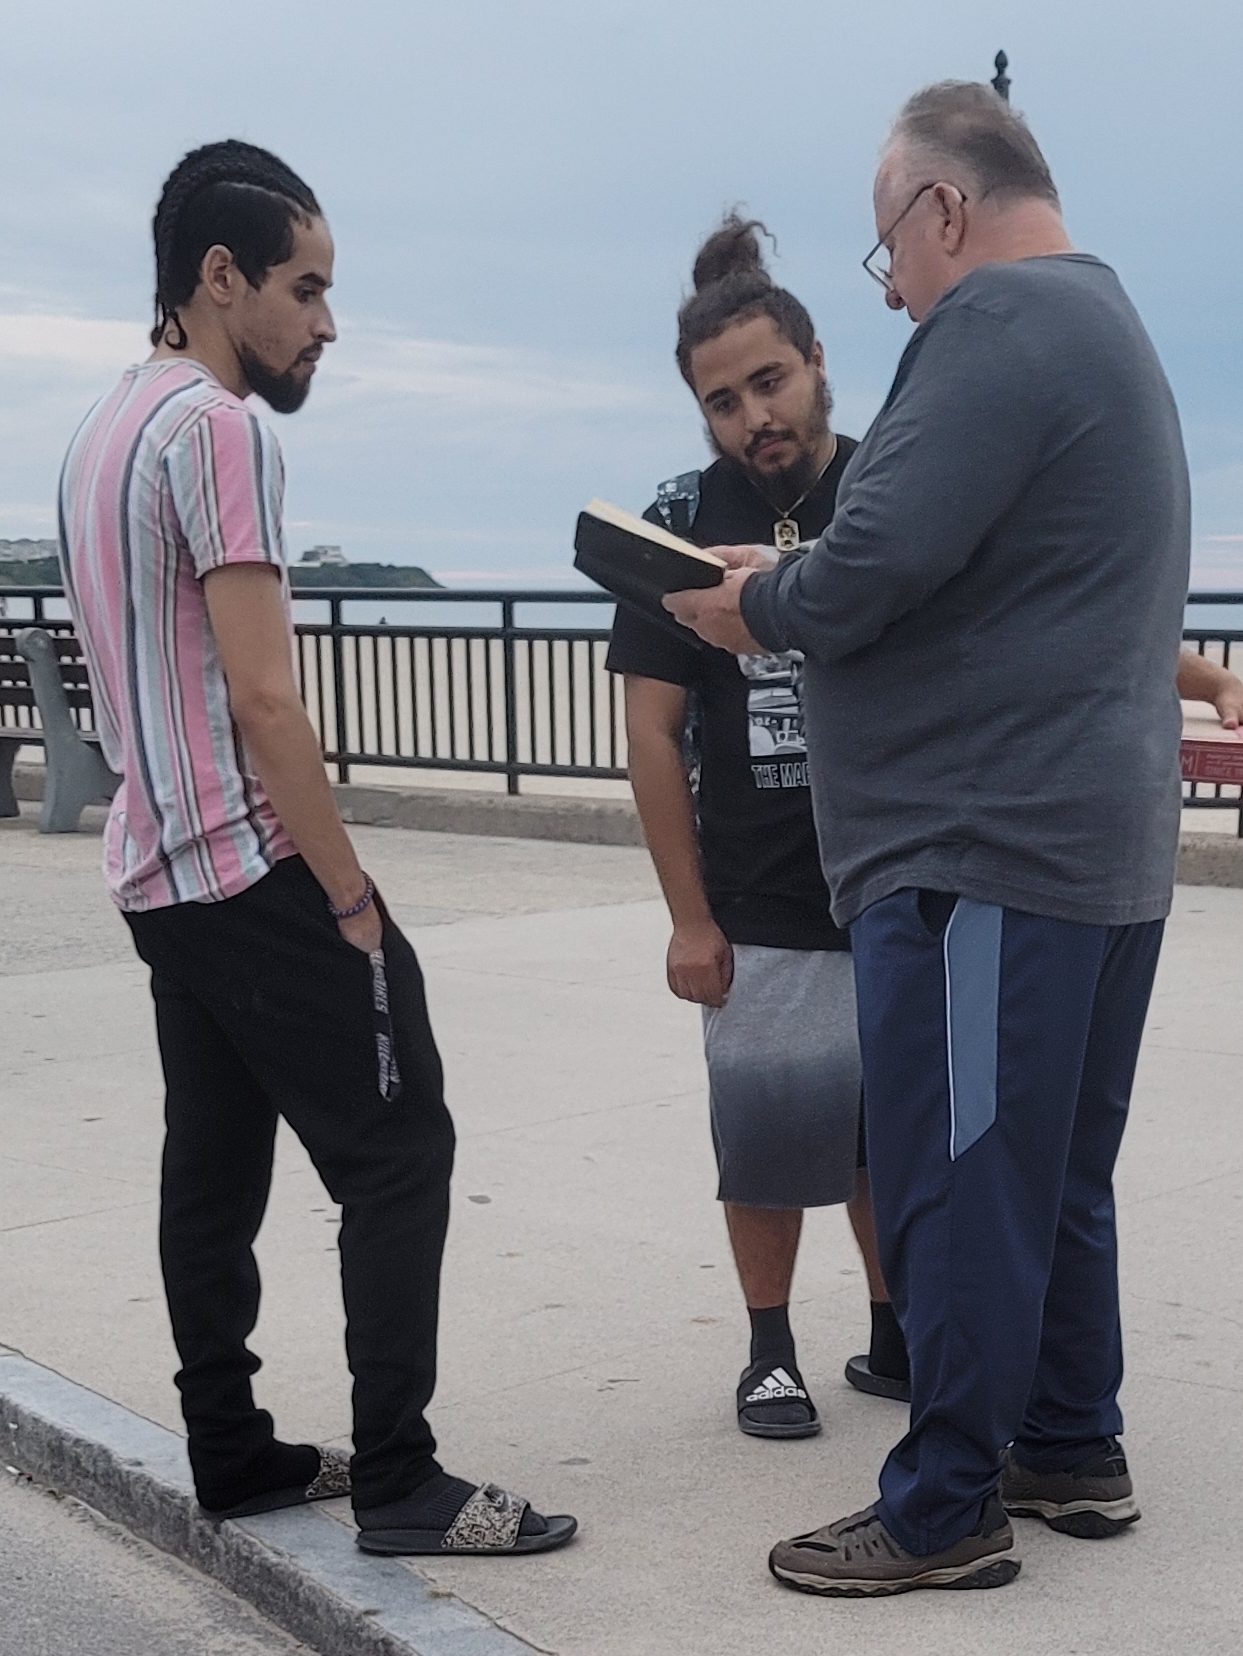 This is Jose and Jeremiah, and they were a terrific "Divine Appointment." ❤️  It's very powerful to open The Word of God with someone because God is powerful.  Richard opened to John 3:3 and had them read it. "Jesus replied, 'I tell you the truth, unless you are born again, you cannot see the Kingdom of God'" (John 3:3).  Richard asked Jose and Jeremiah what they thought it meant, and that lead to a great conversation.  They each took a copy of The Gospel of John and said they'd read it.